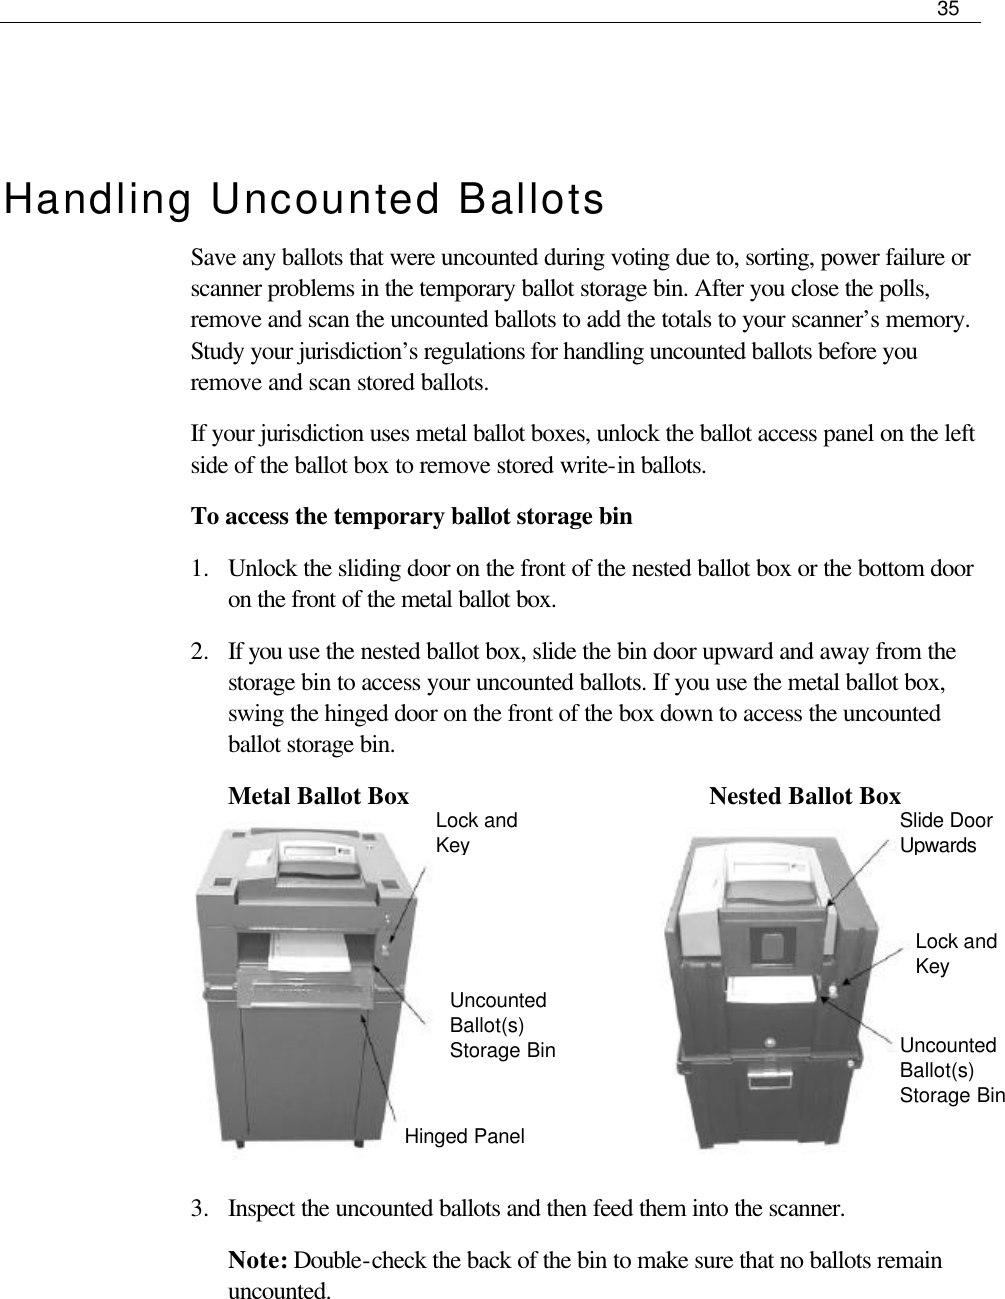     35   Lock and Key Uncounted Ballot(s) Storage Bin Hinged Panel  Slide Door Upwards Lock and Key Uncounted Ballot(s) Storage Bin   Handling Uncounted Ballots Save any ballots that were uncounted during voting due to, sorting, power failure or scanner problems in the temporary ballot storage bin. After you close the polls, remove and scan the uncounted ballots to add the totals to your scanner’s memory. Study your jurisdiction’s regulations for handling uncounted ballots before you remove and scan stored ballots. If your jurisdiction uses metal ballot boxes, unlock the ballot access panel on the left side of the ballot box to remove stored write-in ballots.  To access the temporary ballot storage bin 1.  Unlock the sliding door on the front of the nested ballot box or the bottom door on the front of the metal ballot box. 2.  If you use the nested ballot box, slide the bin door upward and away from the storage bin to access your uncounted ballots. If you use the metal ballot box, swing the hinged door on the front of the box down to access the uncounted ballot storage bin.  Metal Ballot Box                                 Nested Ballot Box        3.  Inspect the uncounted ballots and then feed them into the scanner. Note: Double-check the back of the bin to make sure that no ballots remain uncounted.    